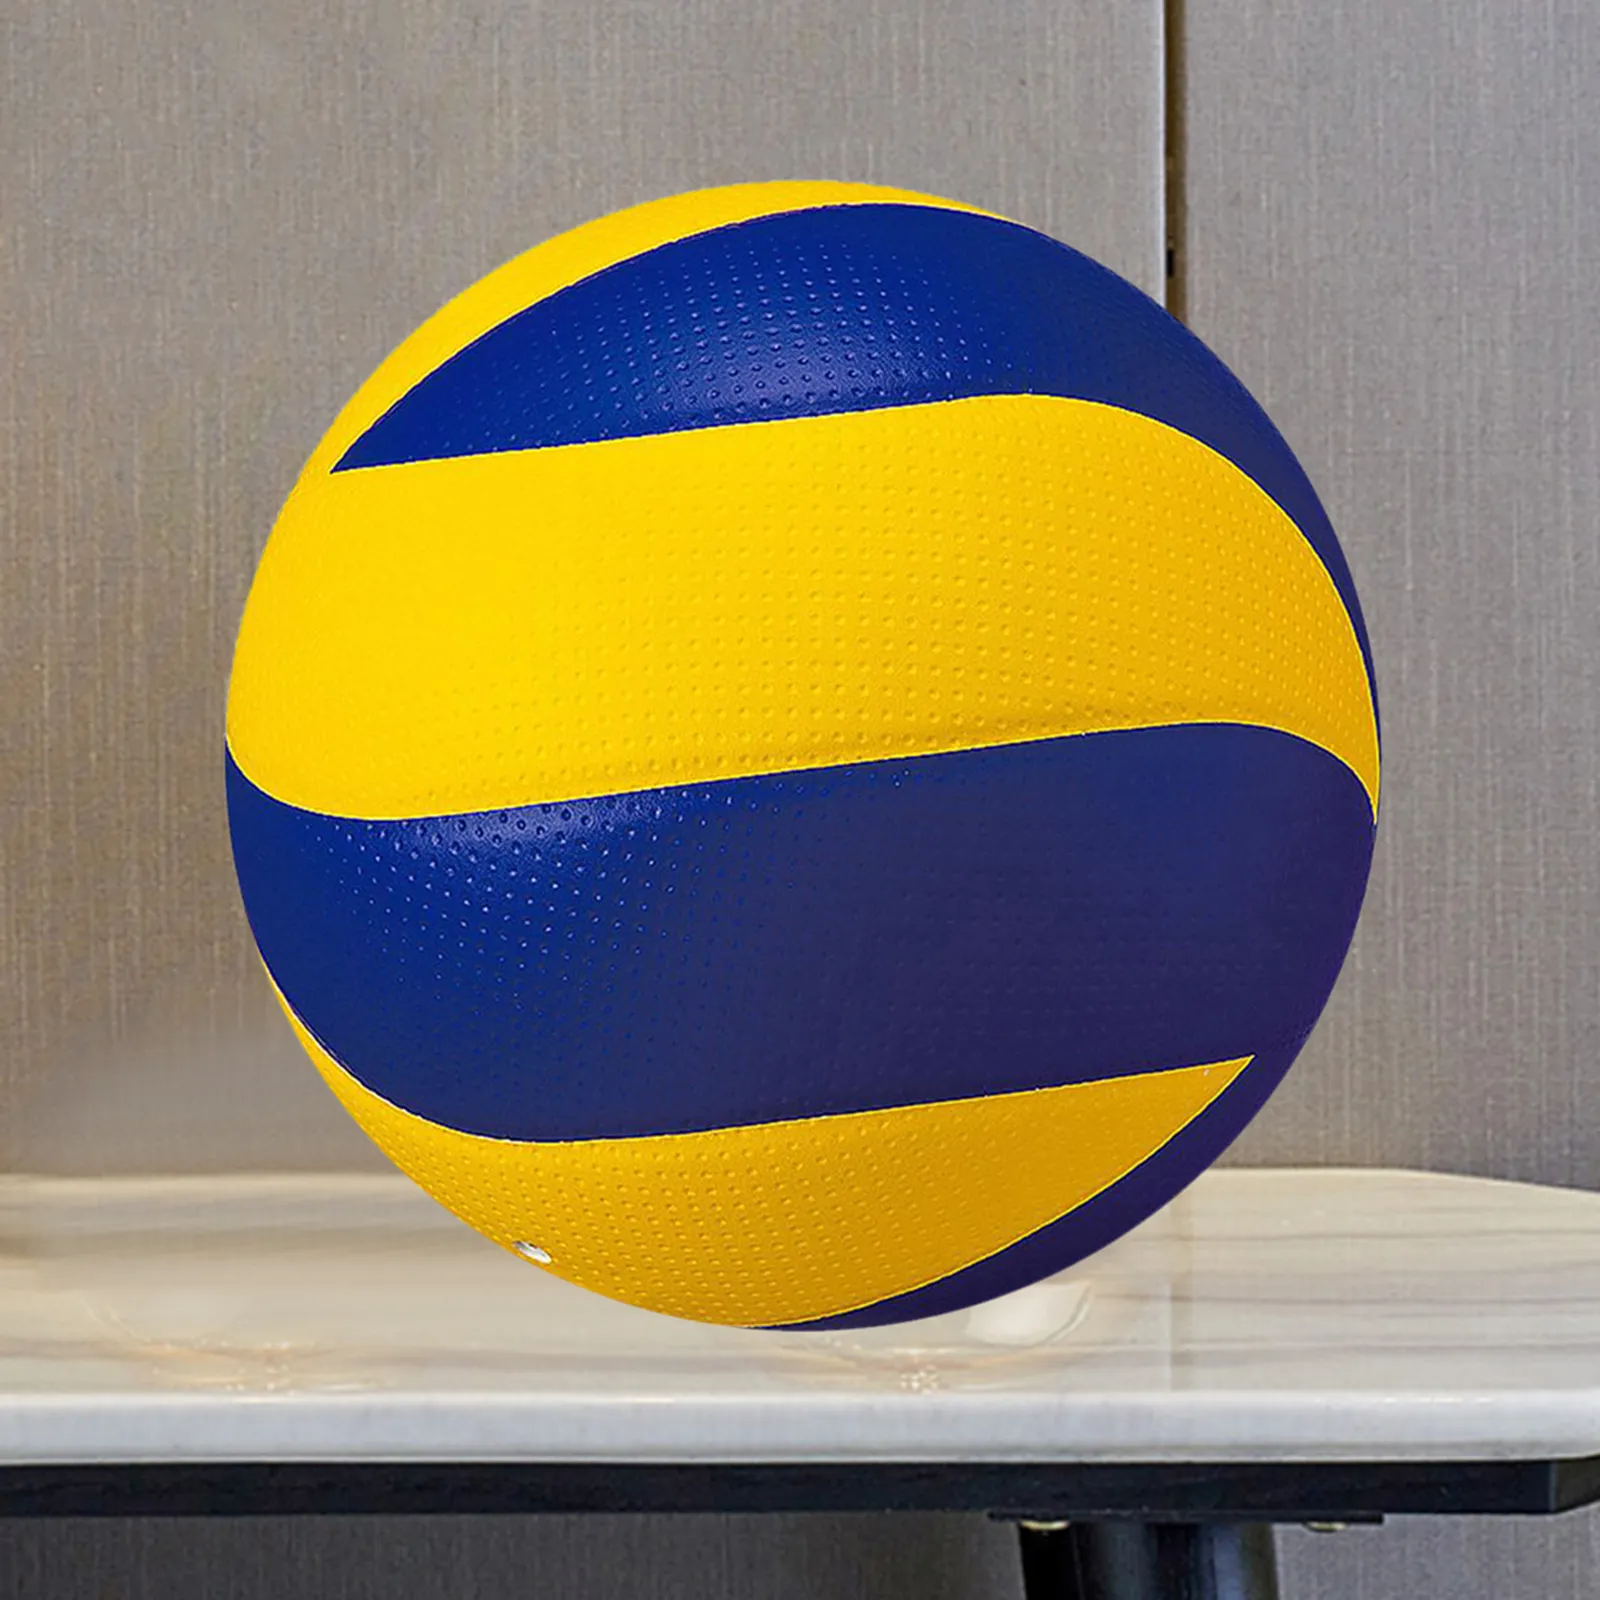 Standard Size 5 Outdoor Beach Volleyball for Adult Children Game